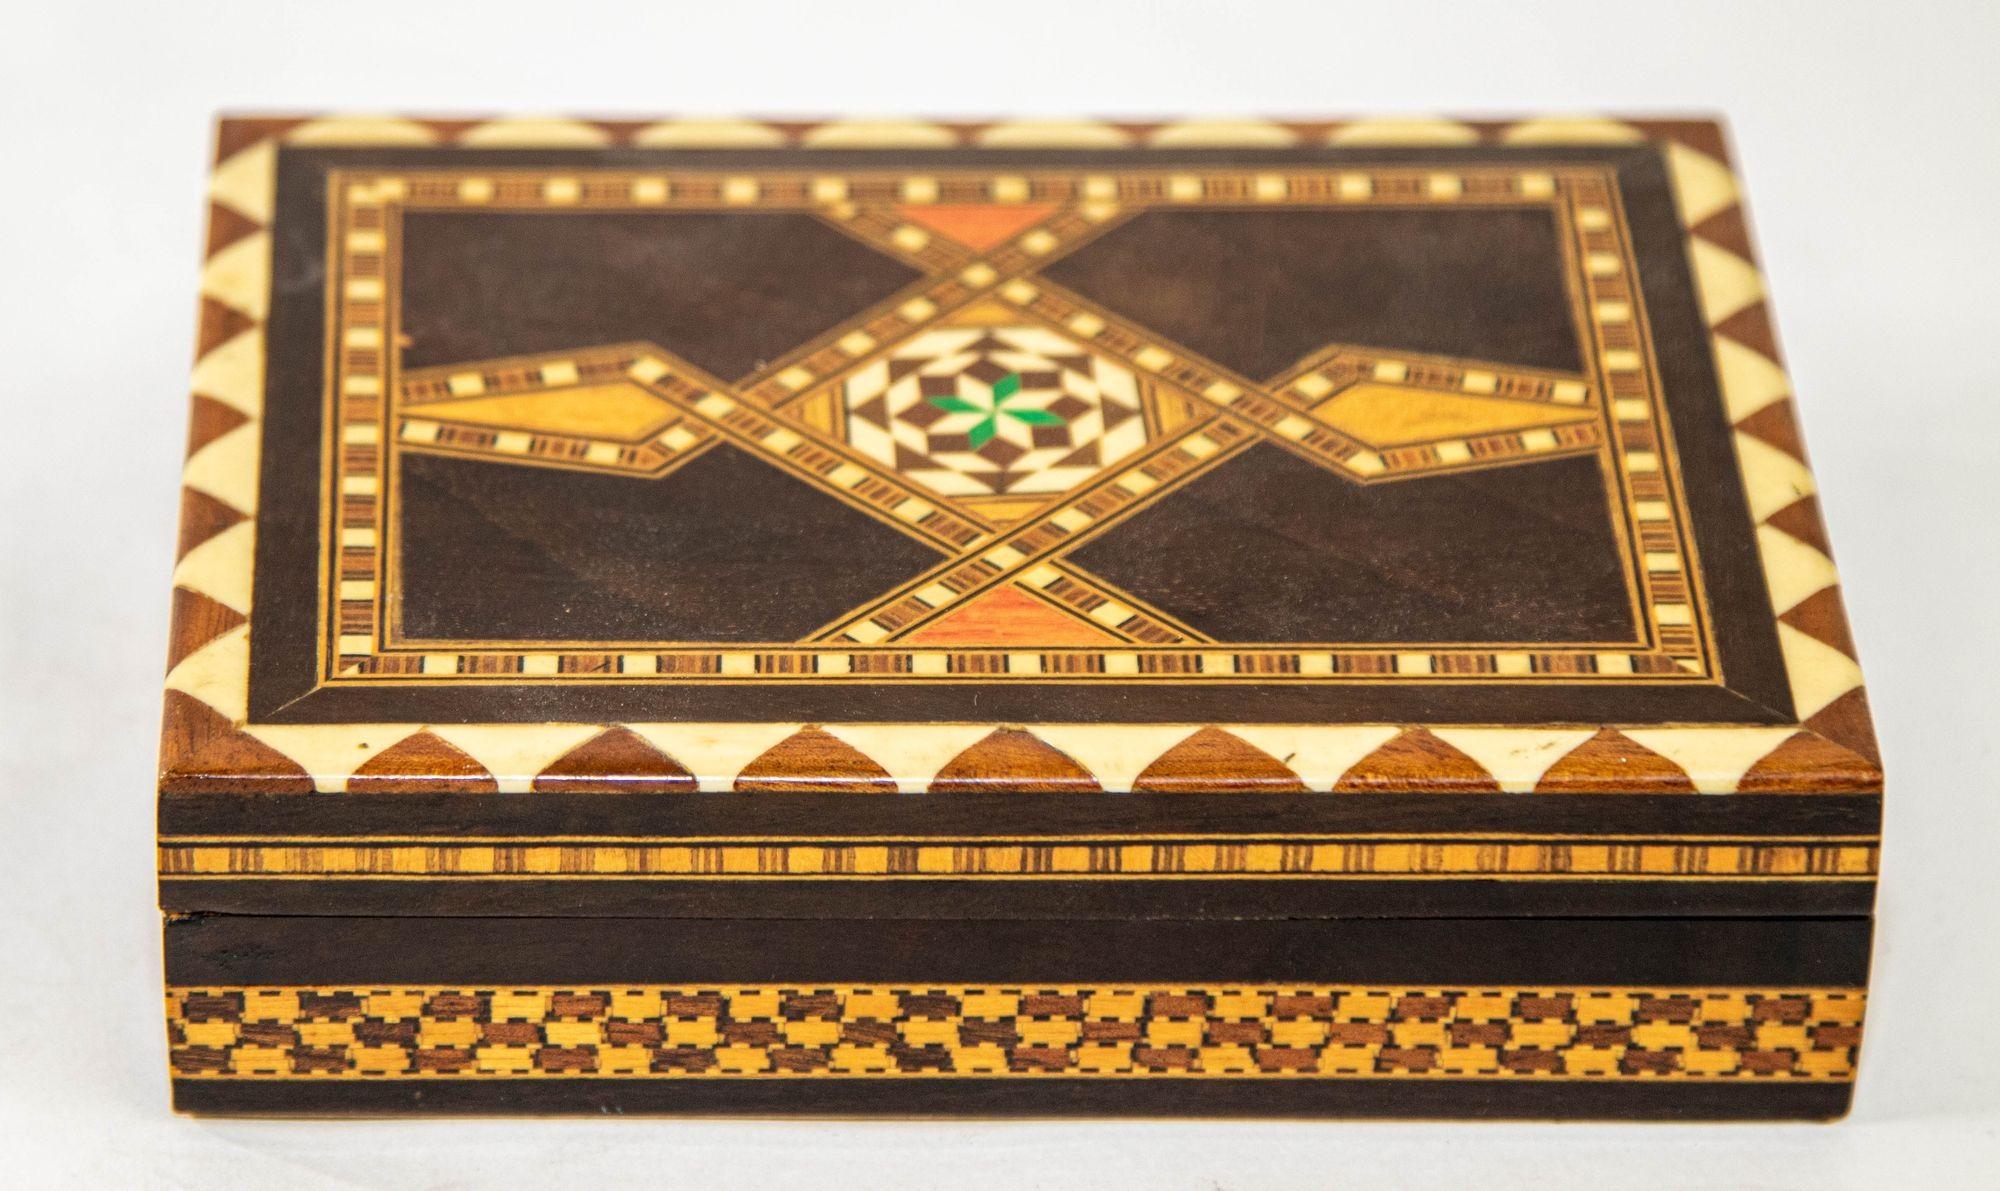 Mid-20th century Moorish Spain Inlaid Marquetry Mosaic Box.
Handcrafted great geometric one of a kind Moorish design.
Middle Eastern Syrian style, Moorish Spain Granada inlaid micro mosaic marquetry.
Stunning handcrafted Syrian style box